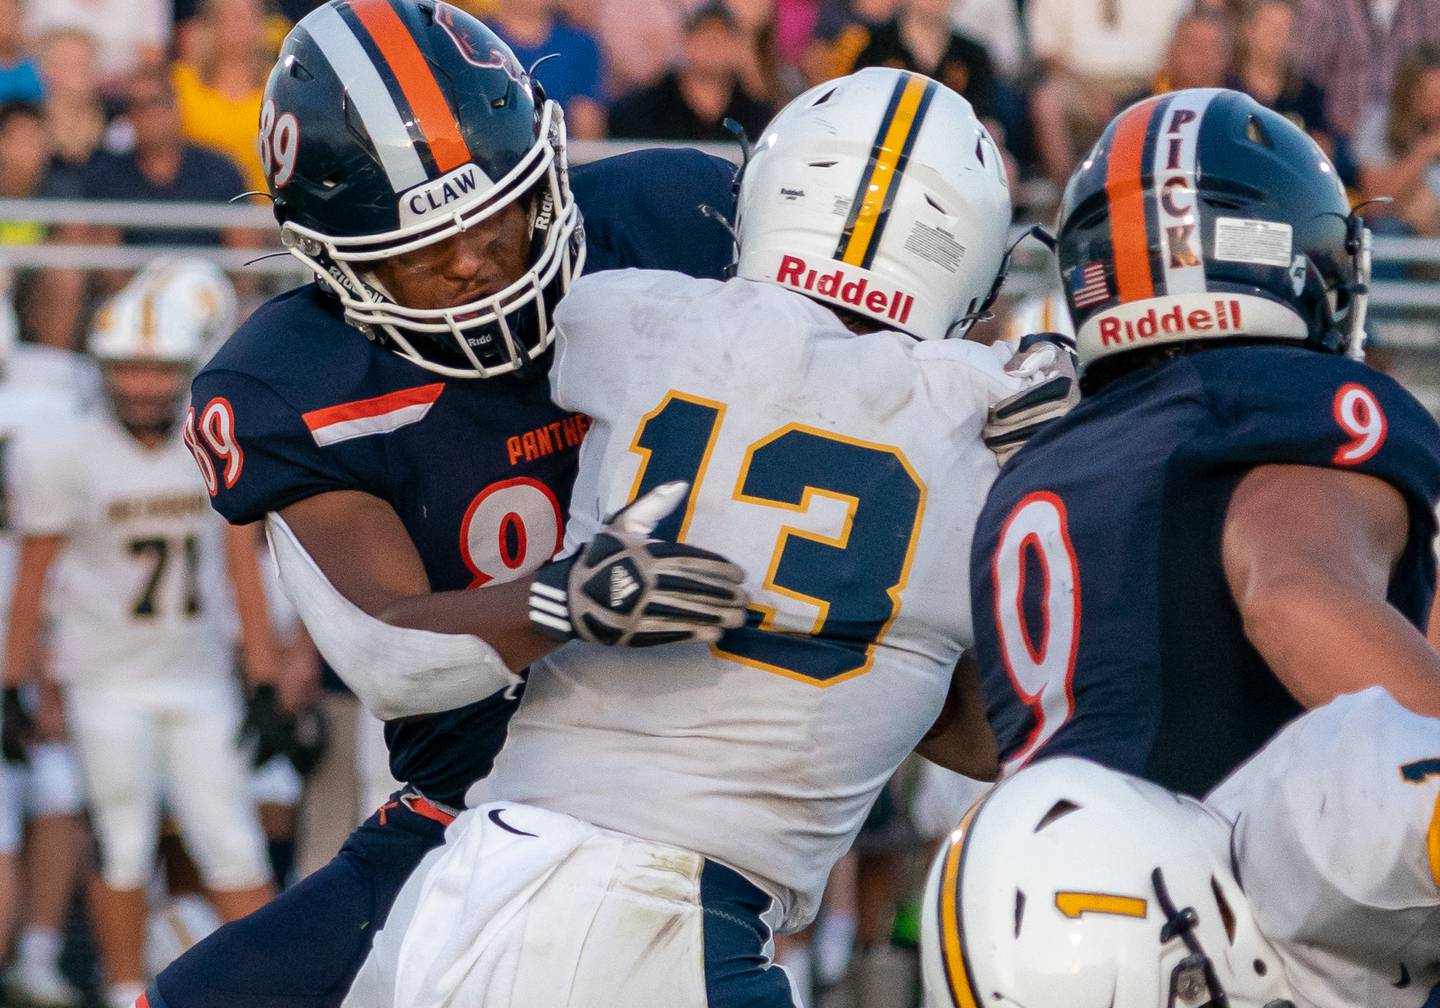 Taiden Thomas (89) of Oswego hits Mark Mennecke (13) of Neuqua Valley in the backfield for a loss in a football game at Oswego High School on Friday August 26, 2022.